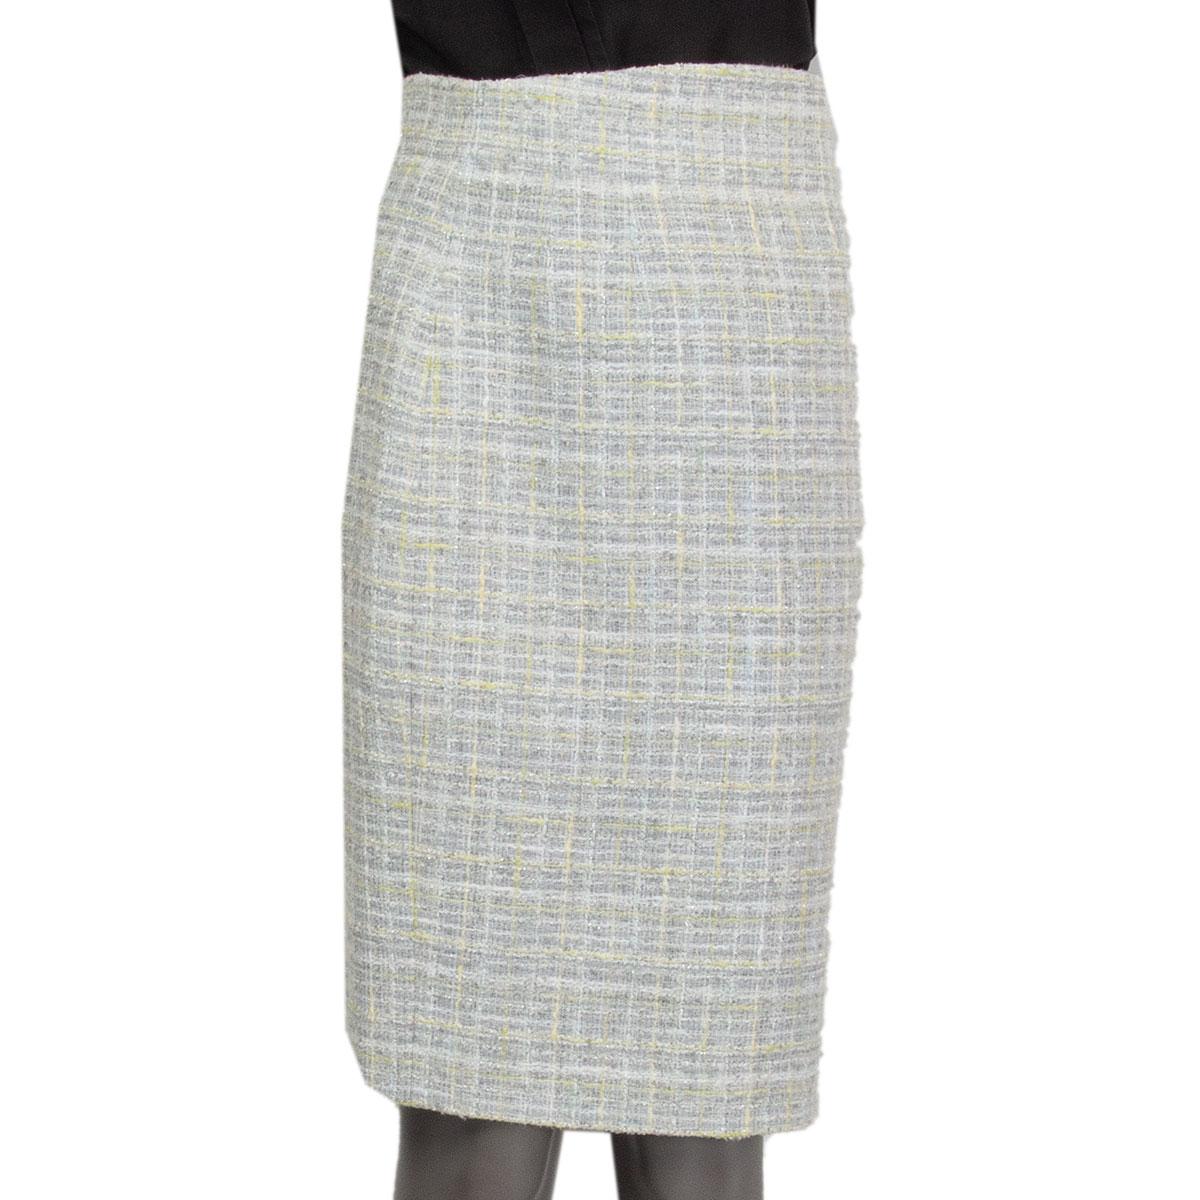 100% authentic Chanel boucle pencil skirt in light grey, white, lime cotton (56%), wool (19%), rayon (18%), nylon (6%) and polyester (1%). Closes with three hooks and a concealed zipper on the back and with a slit in the back. Lined in light grey